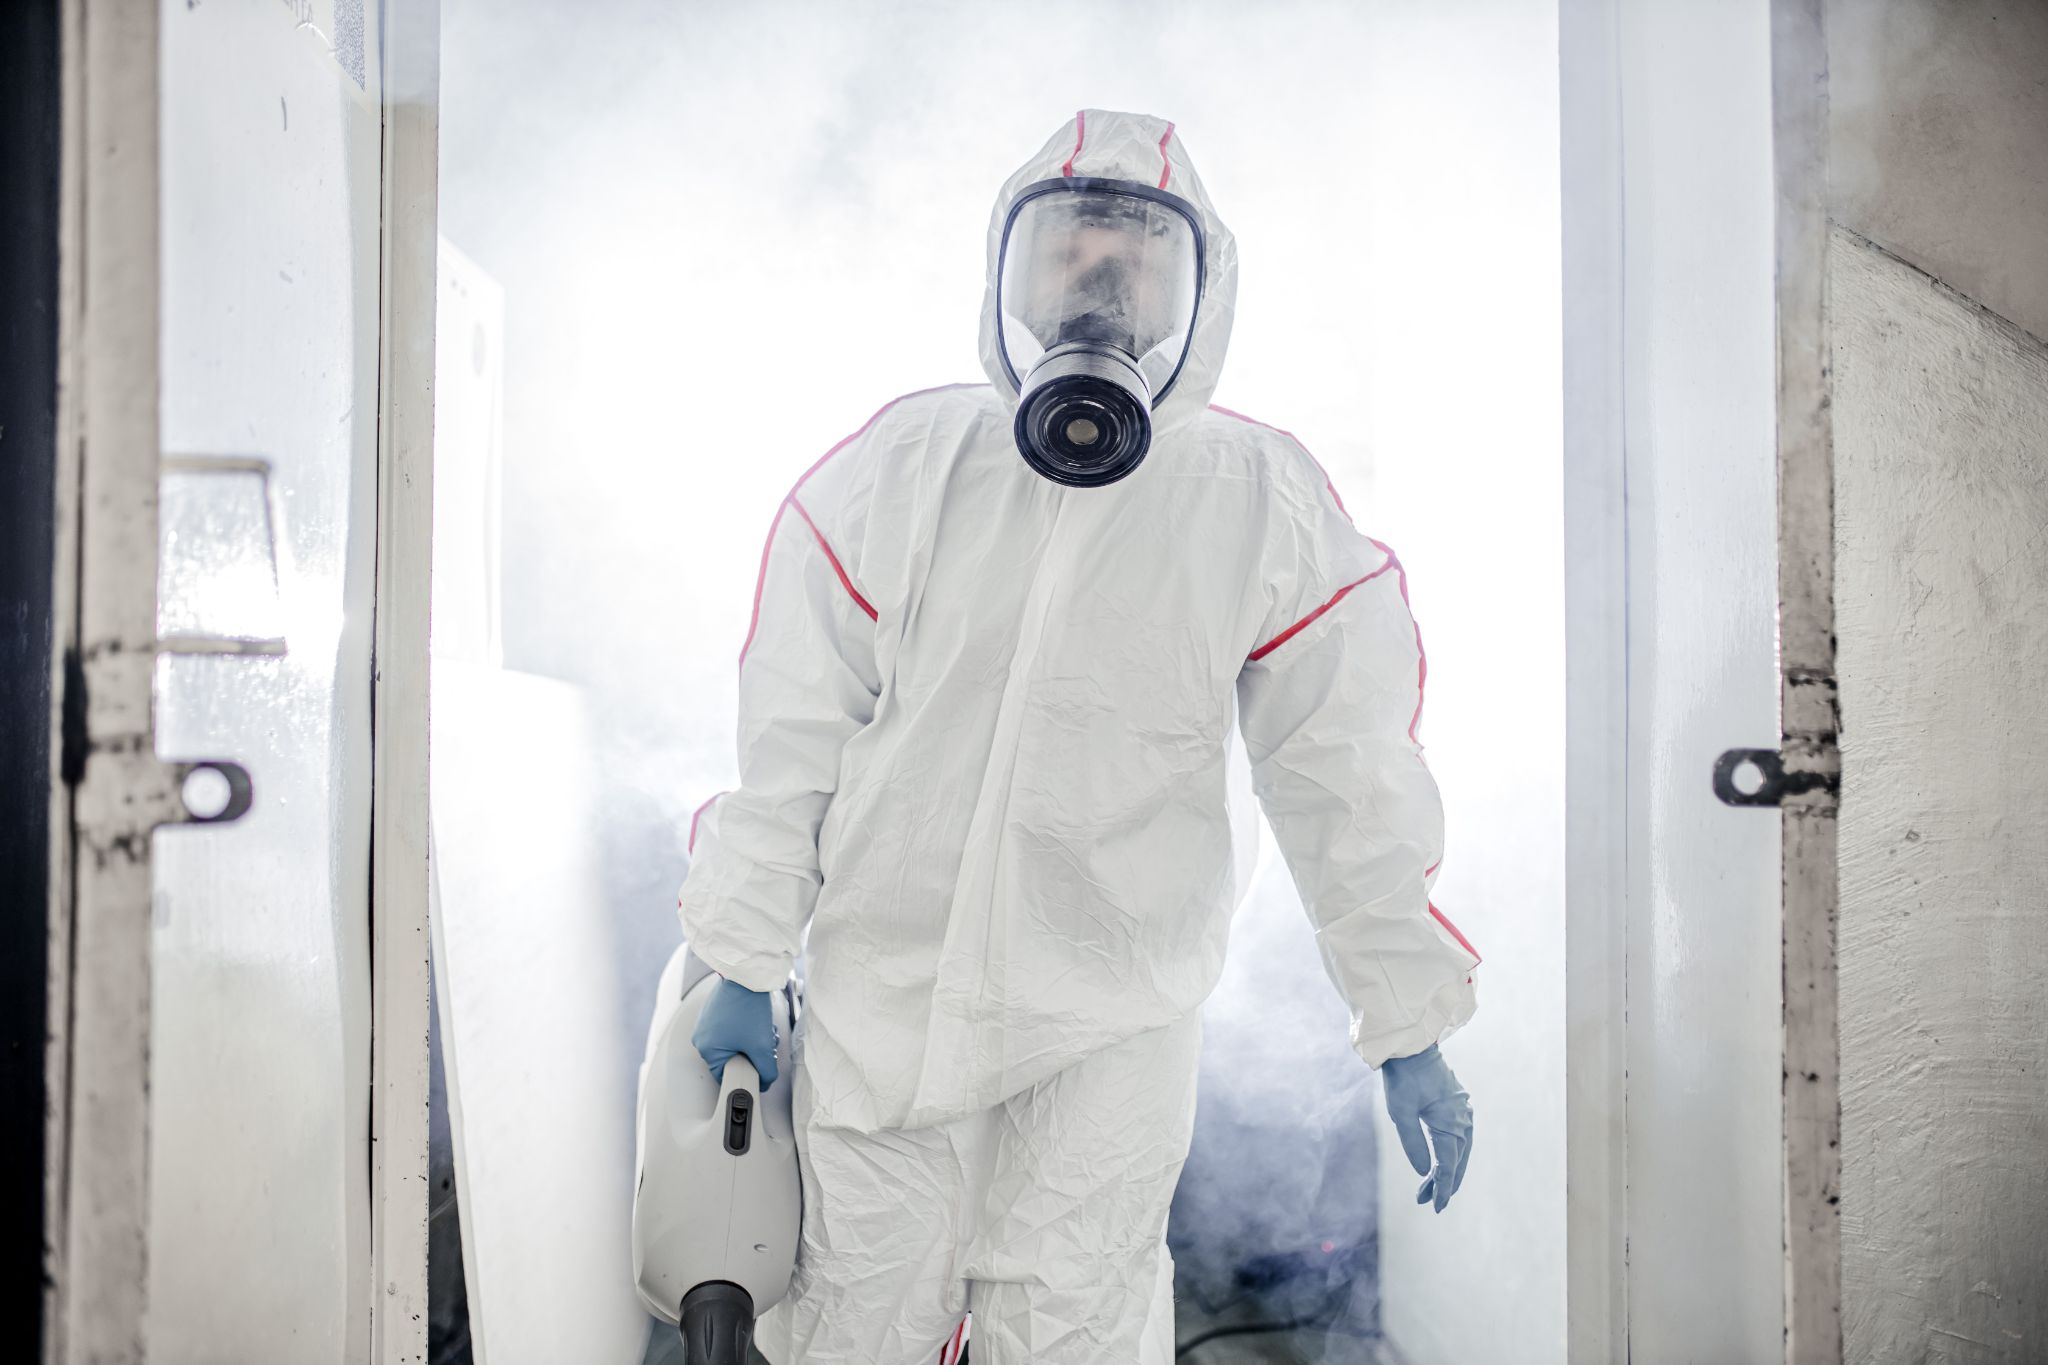 disinfector use sprayers and germs that adhere on objects on the surface